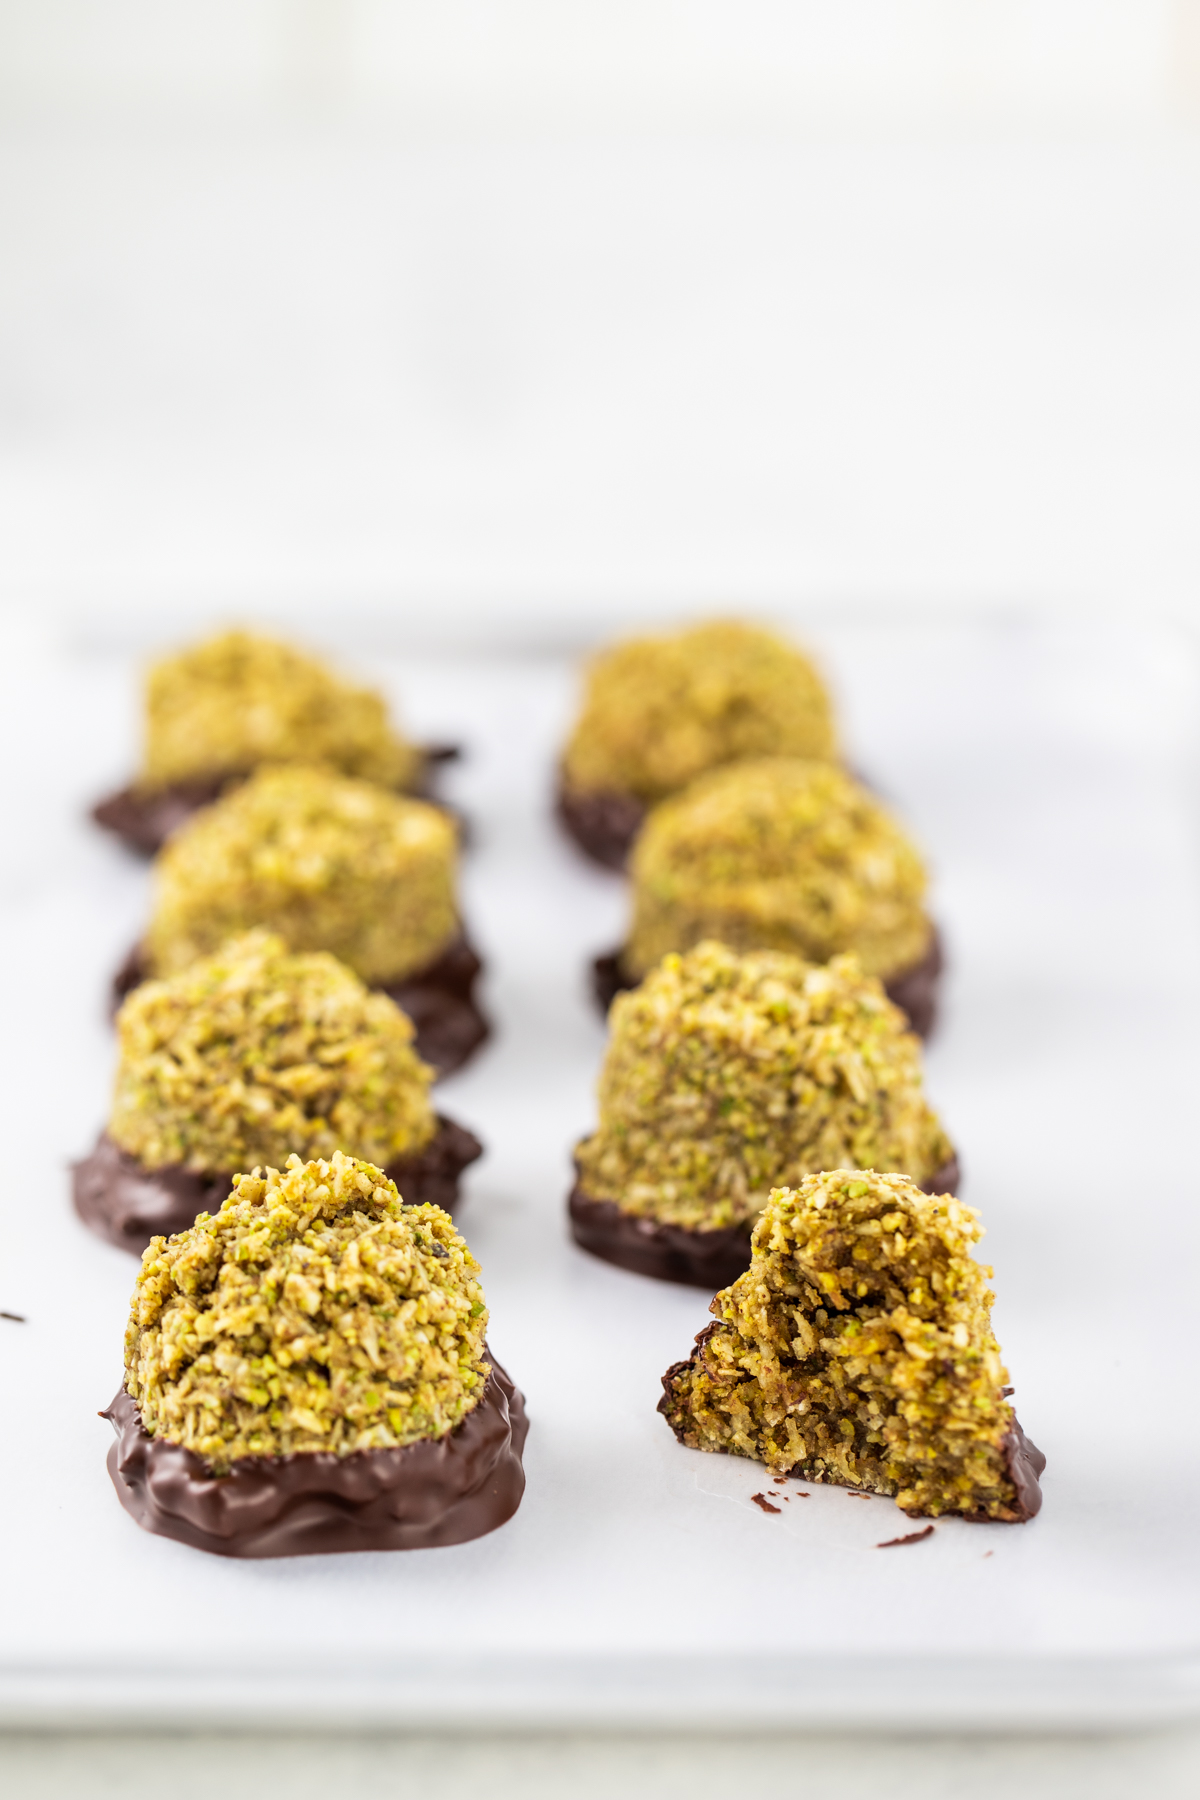 Chocolate dipped Pistachio Five Spice Macaroons on a white background.